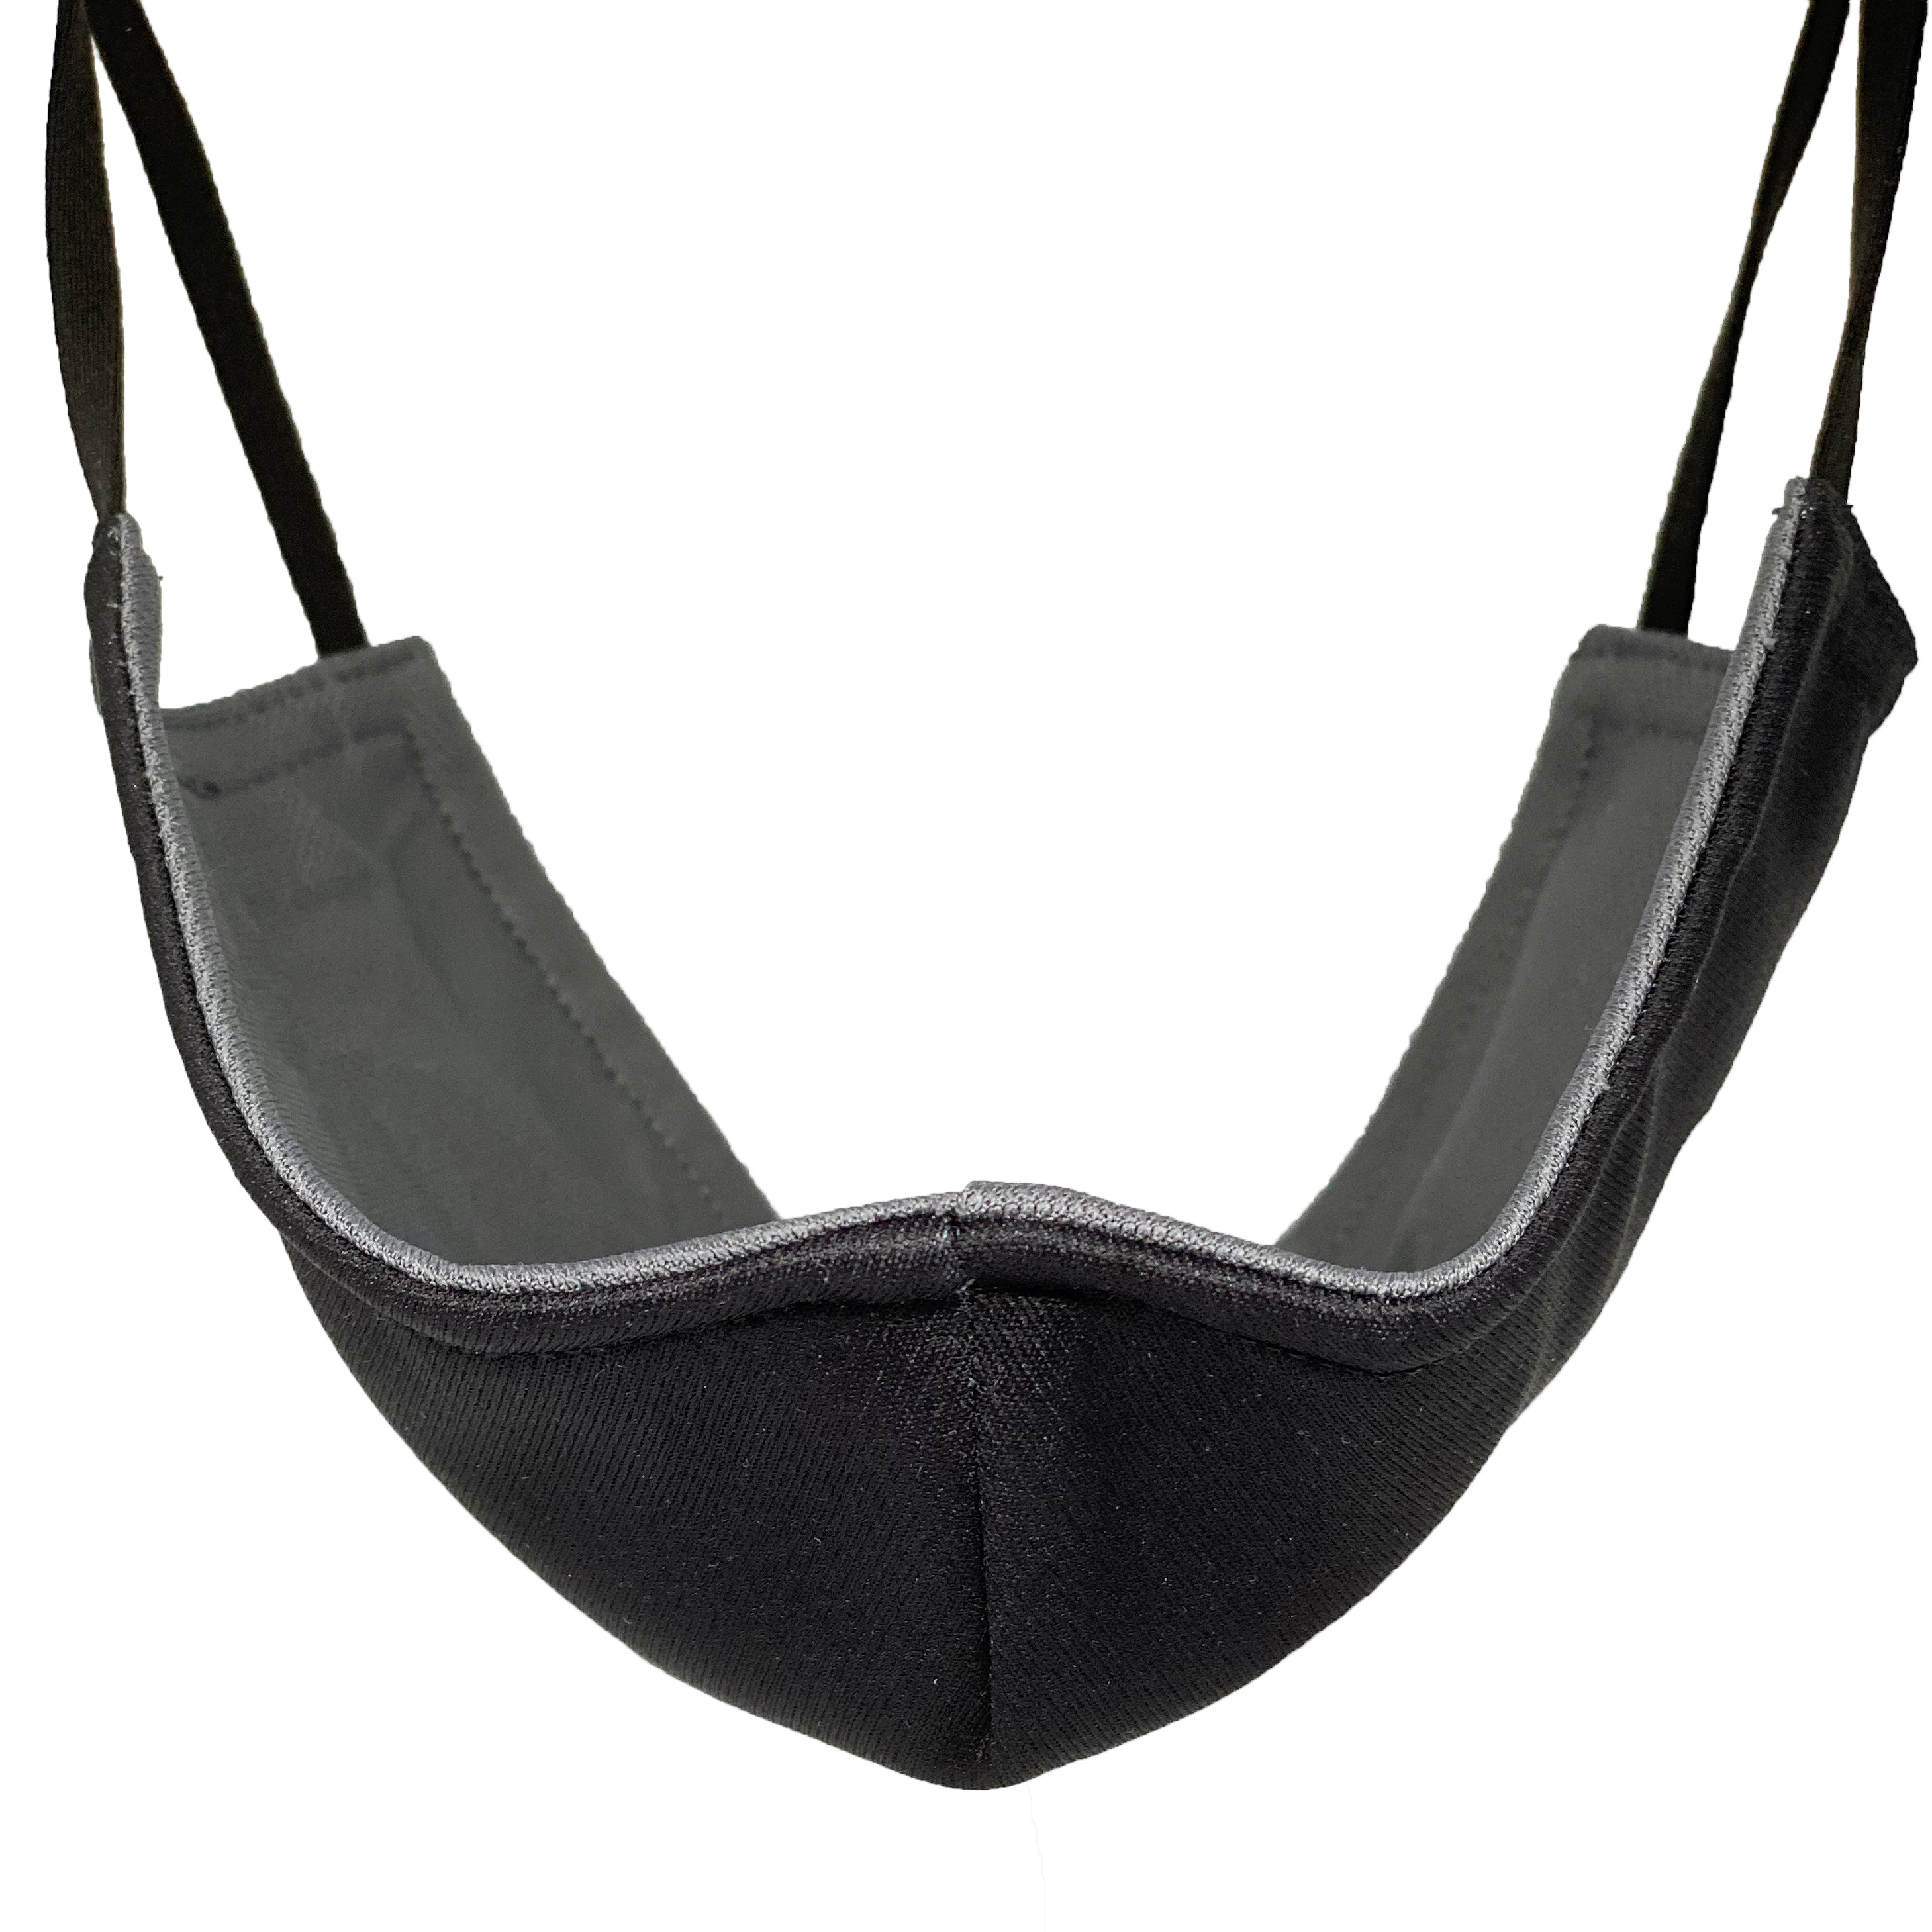 Black Face Mask that is Suitable for Sports and Outdoors: Reusable, Adjustable and Breathable Face Mask, Made in Singapore